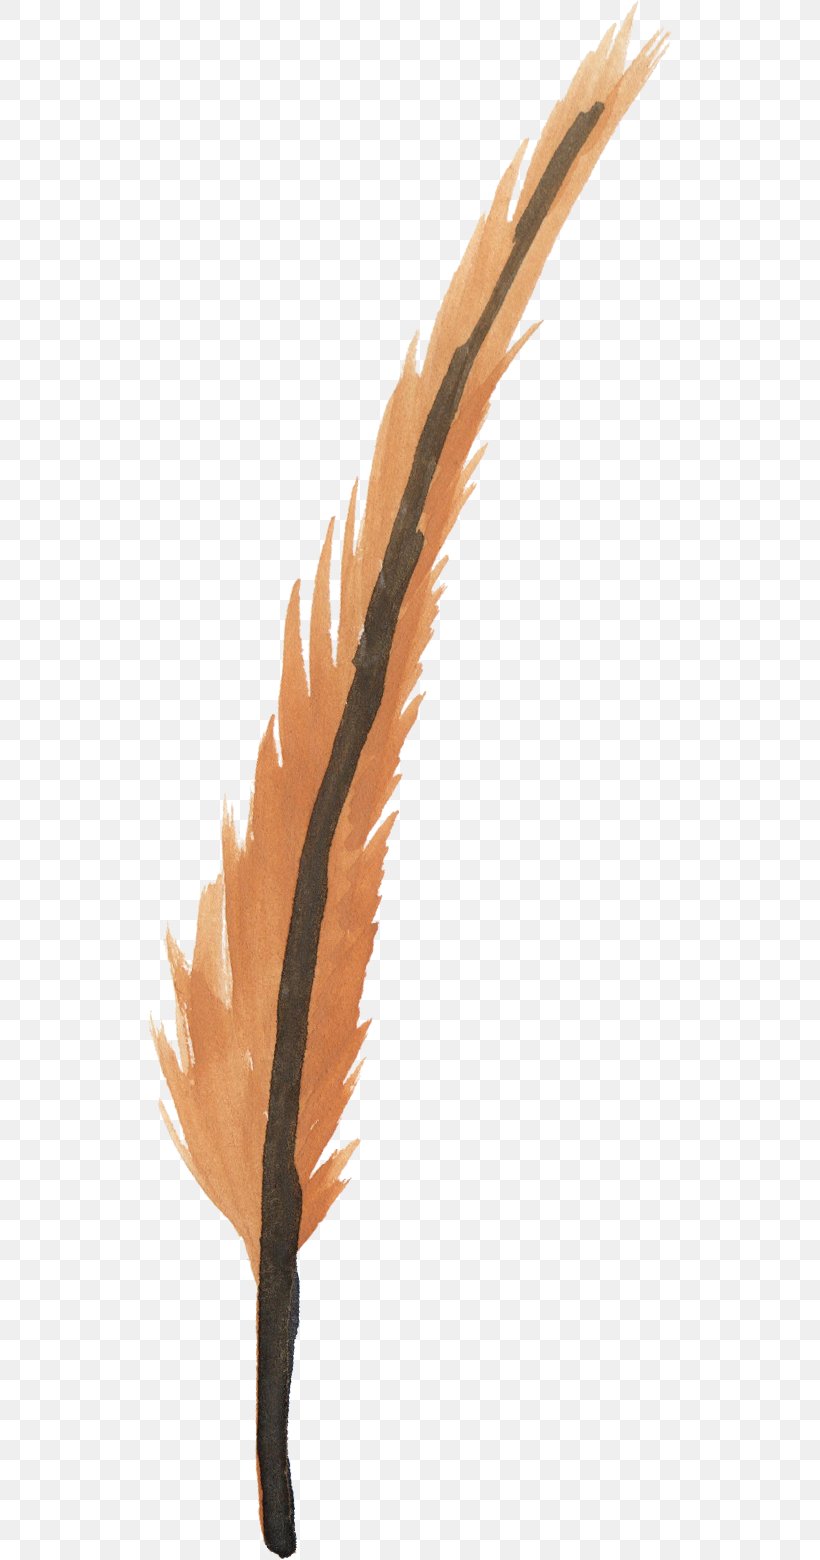 Watercolor Painting Clip Art Feather Image, PNG, 526x1560px, Watercolor Painting, Feather, Magpie, Megabyte, Natural Material Download Free